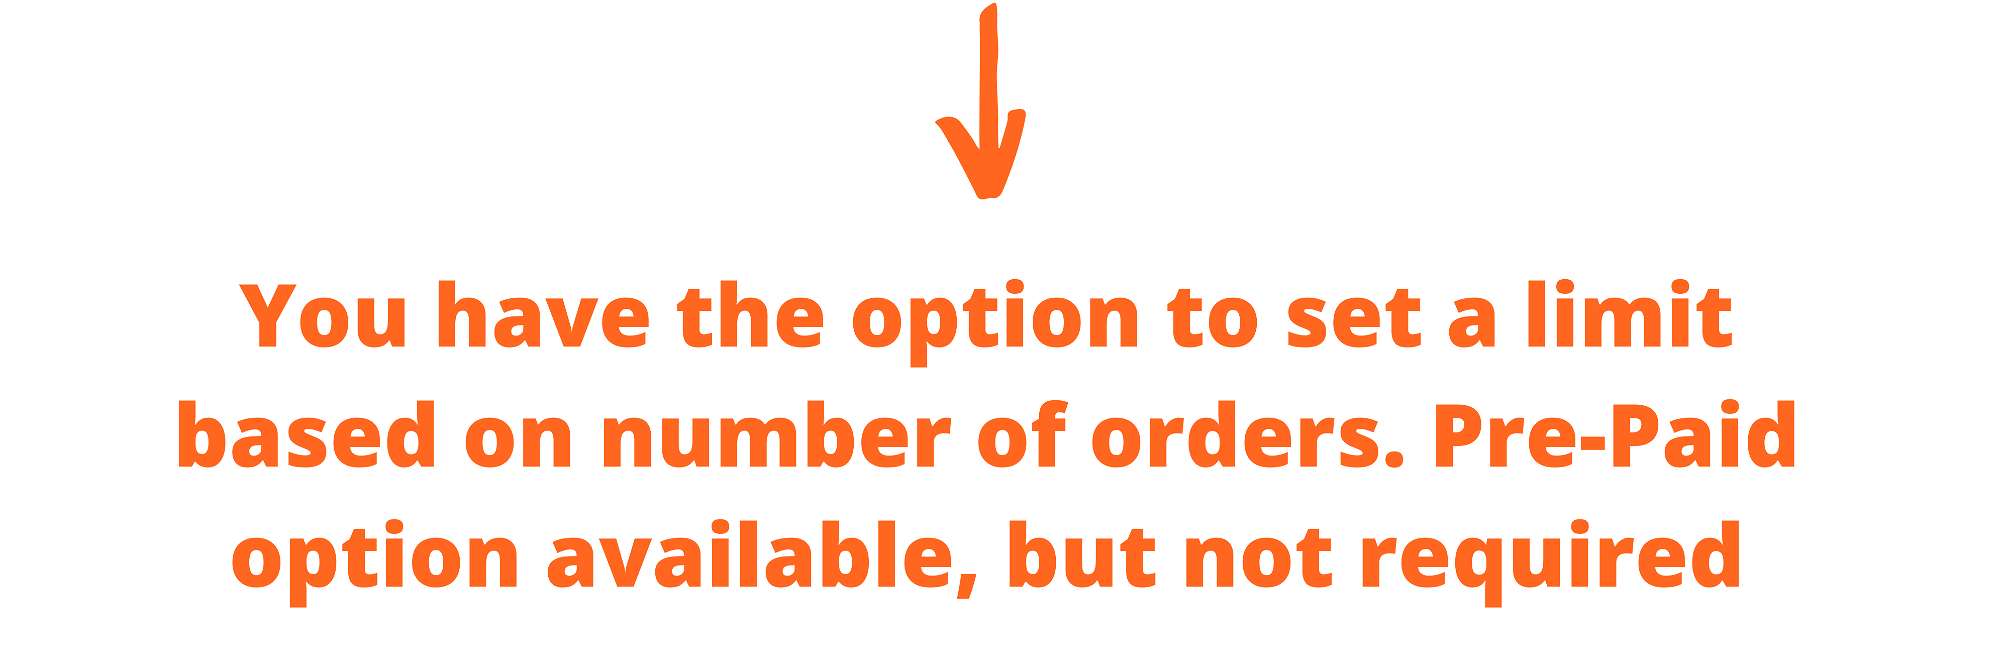 you have the option to set a limit based on number of orders. Pre-paid option available, but not required